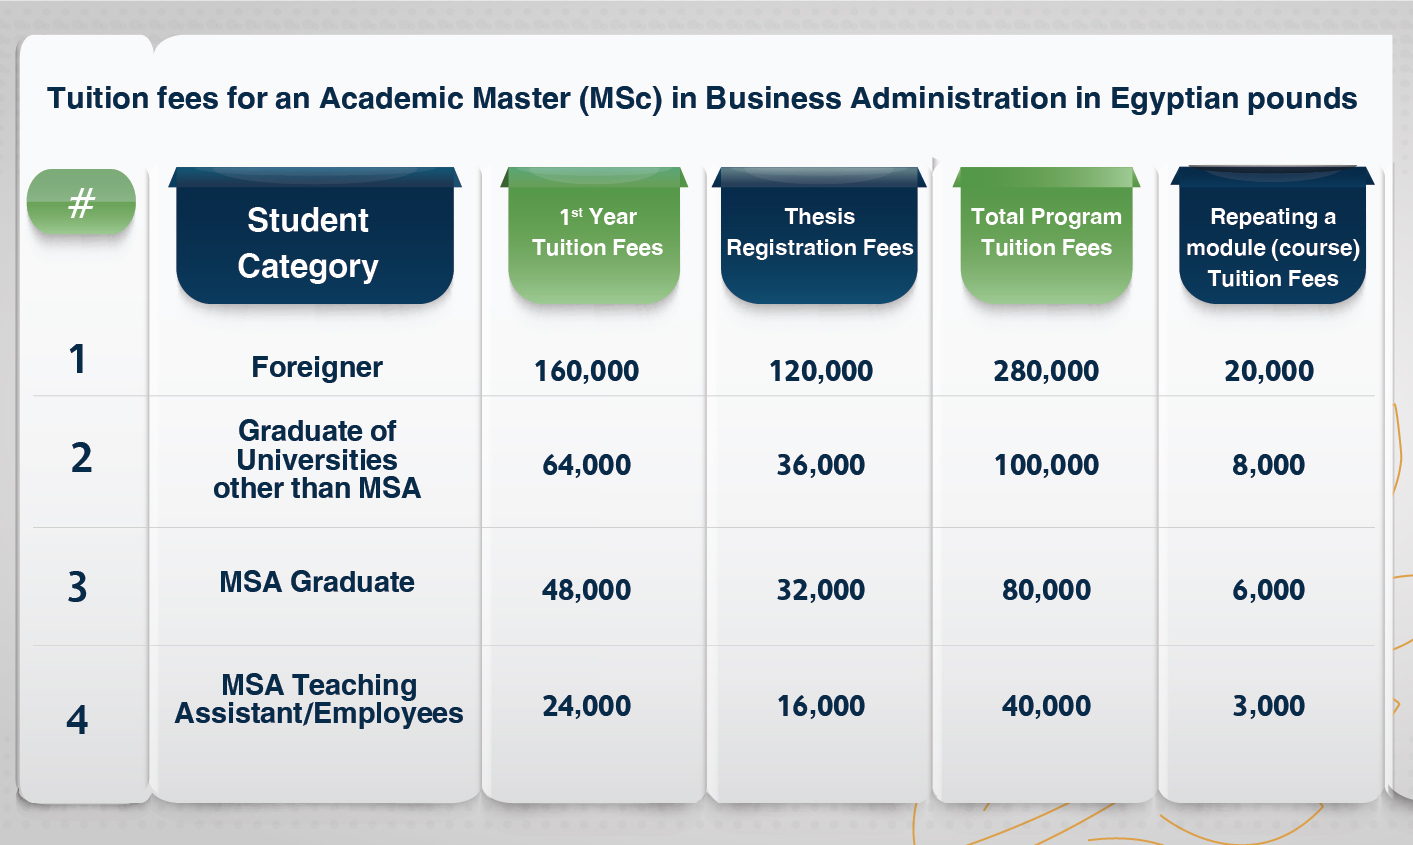 MSA University - MSc in Business Administration Tuition Fees